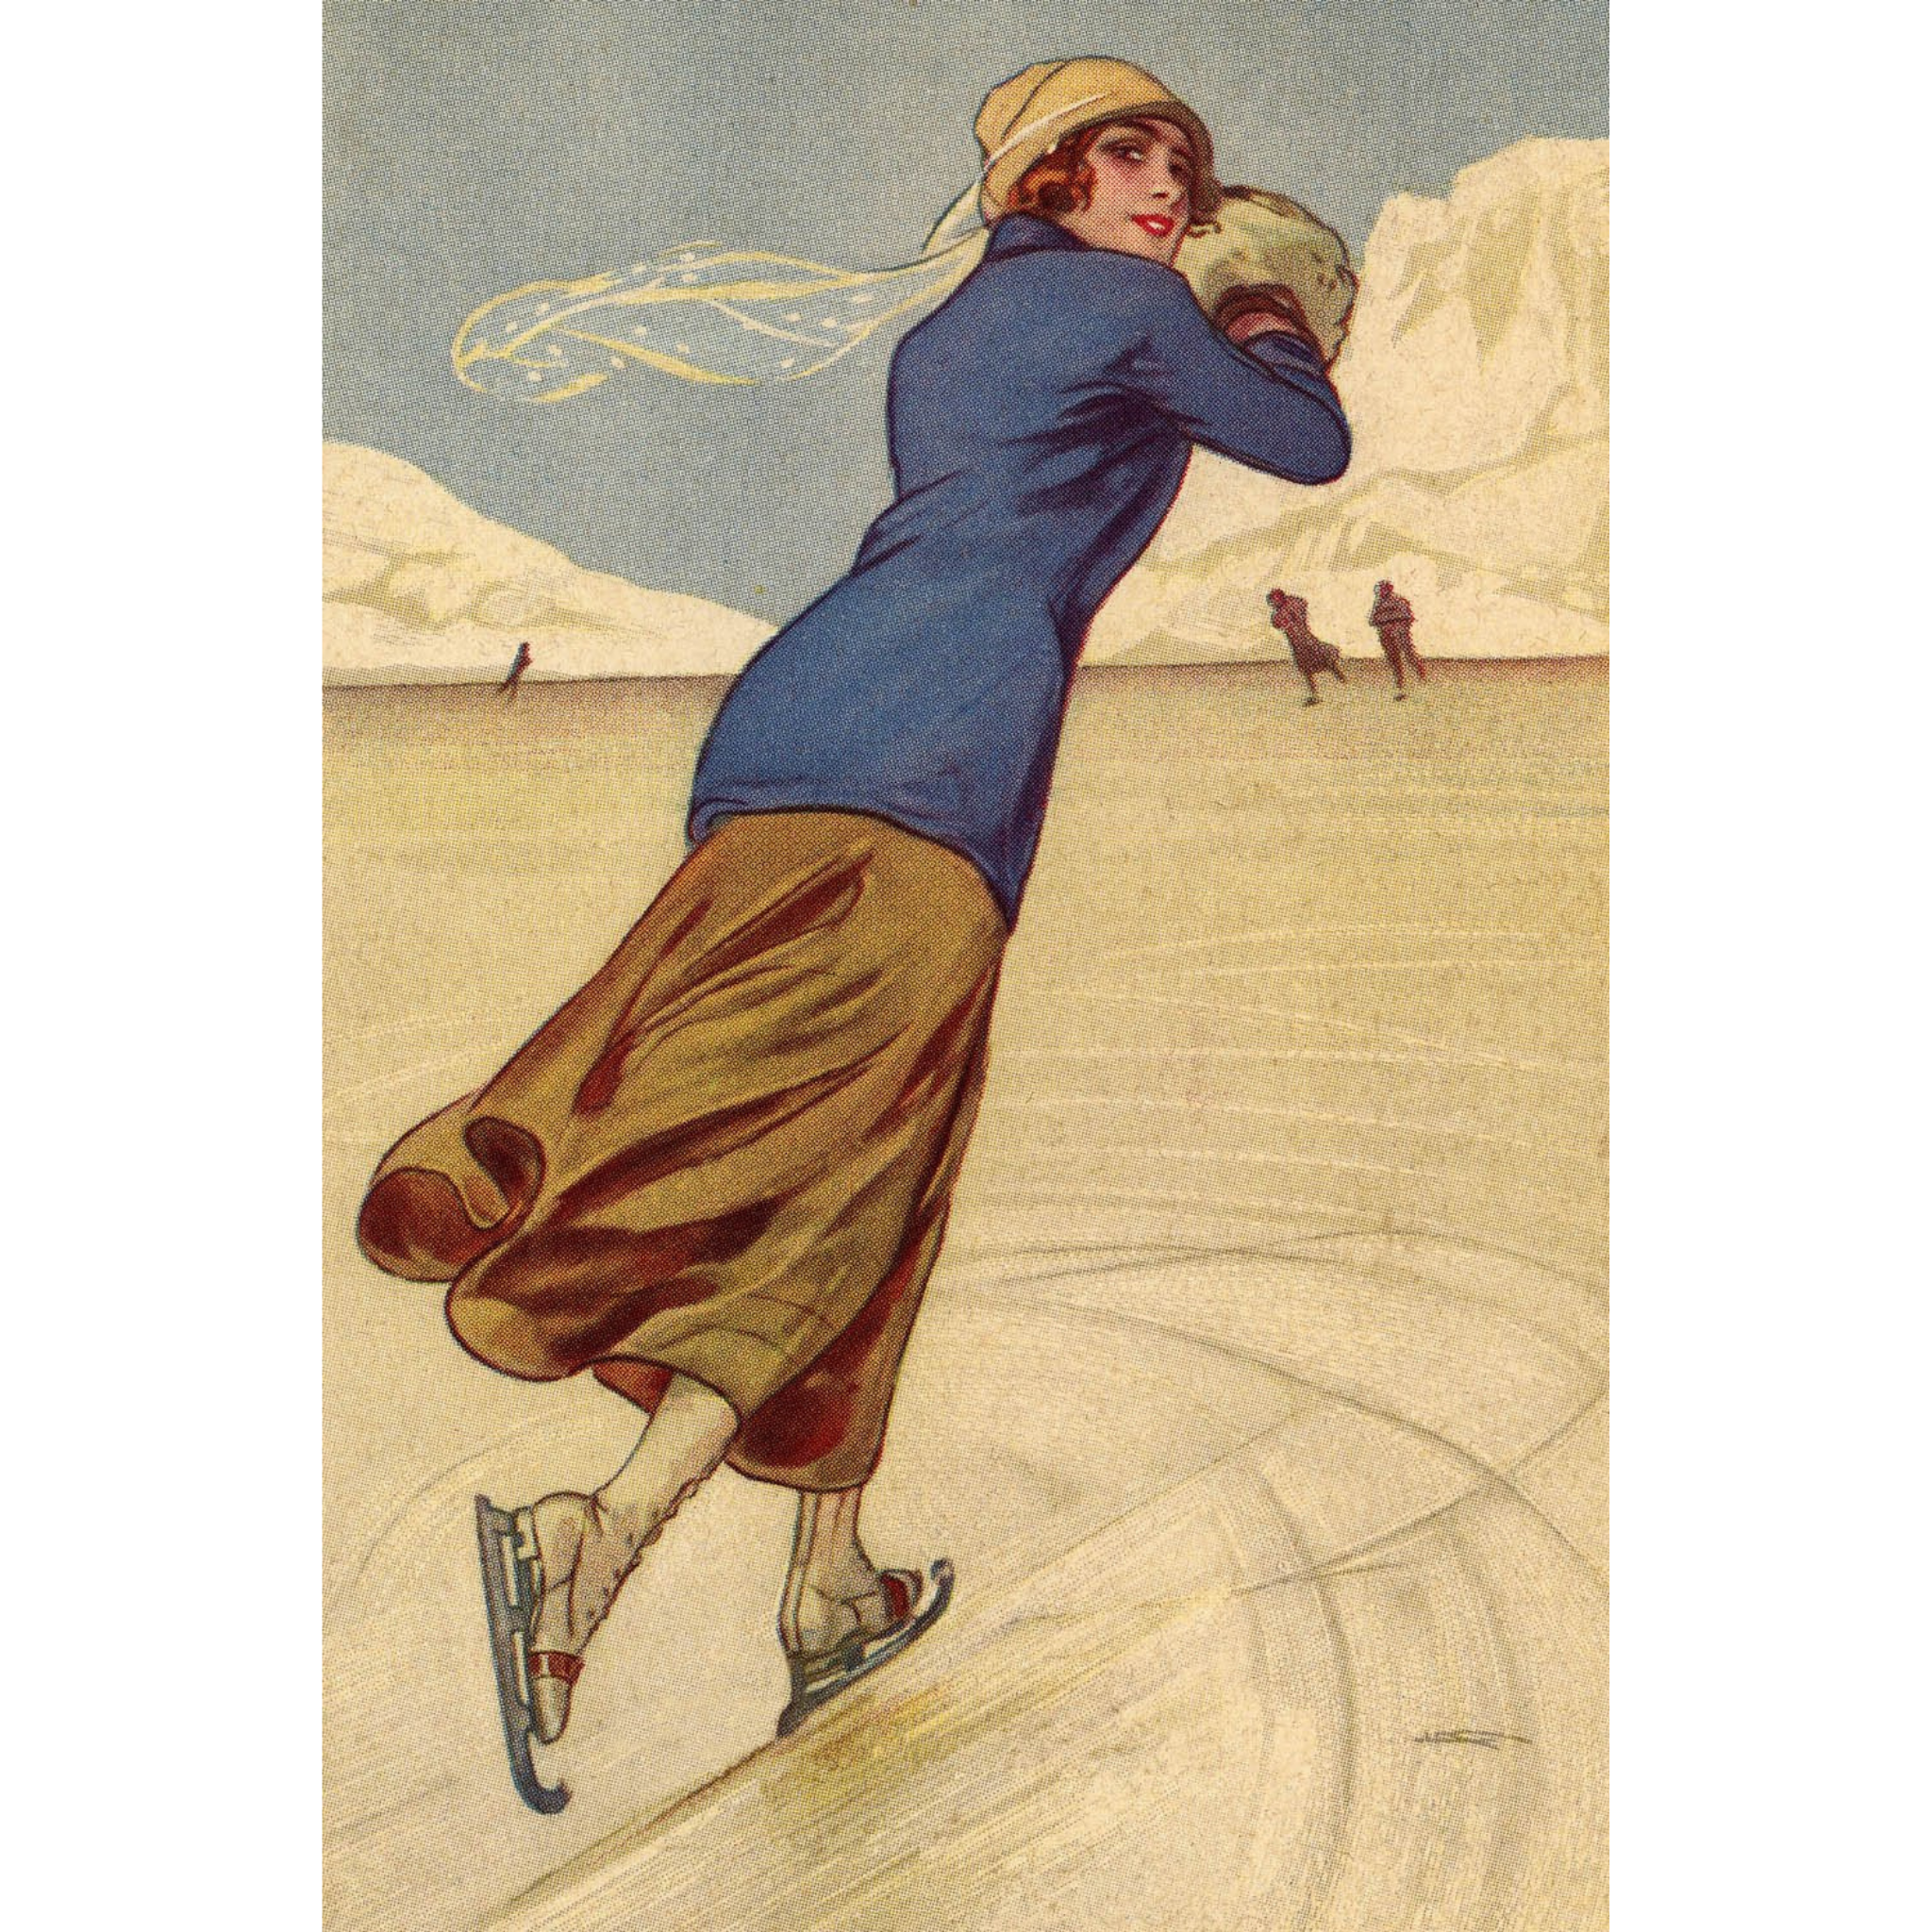 Woman Skating in Blue Sweater with Muffs - ca. 1925 Lithograph